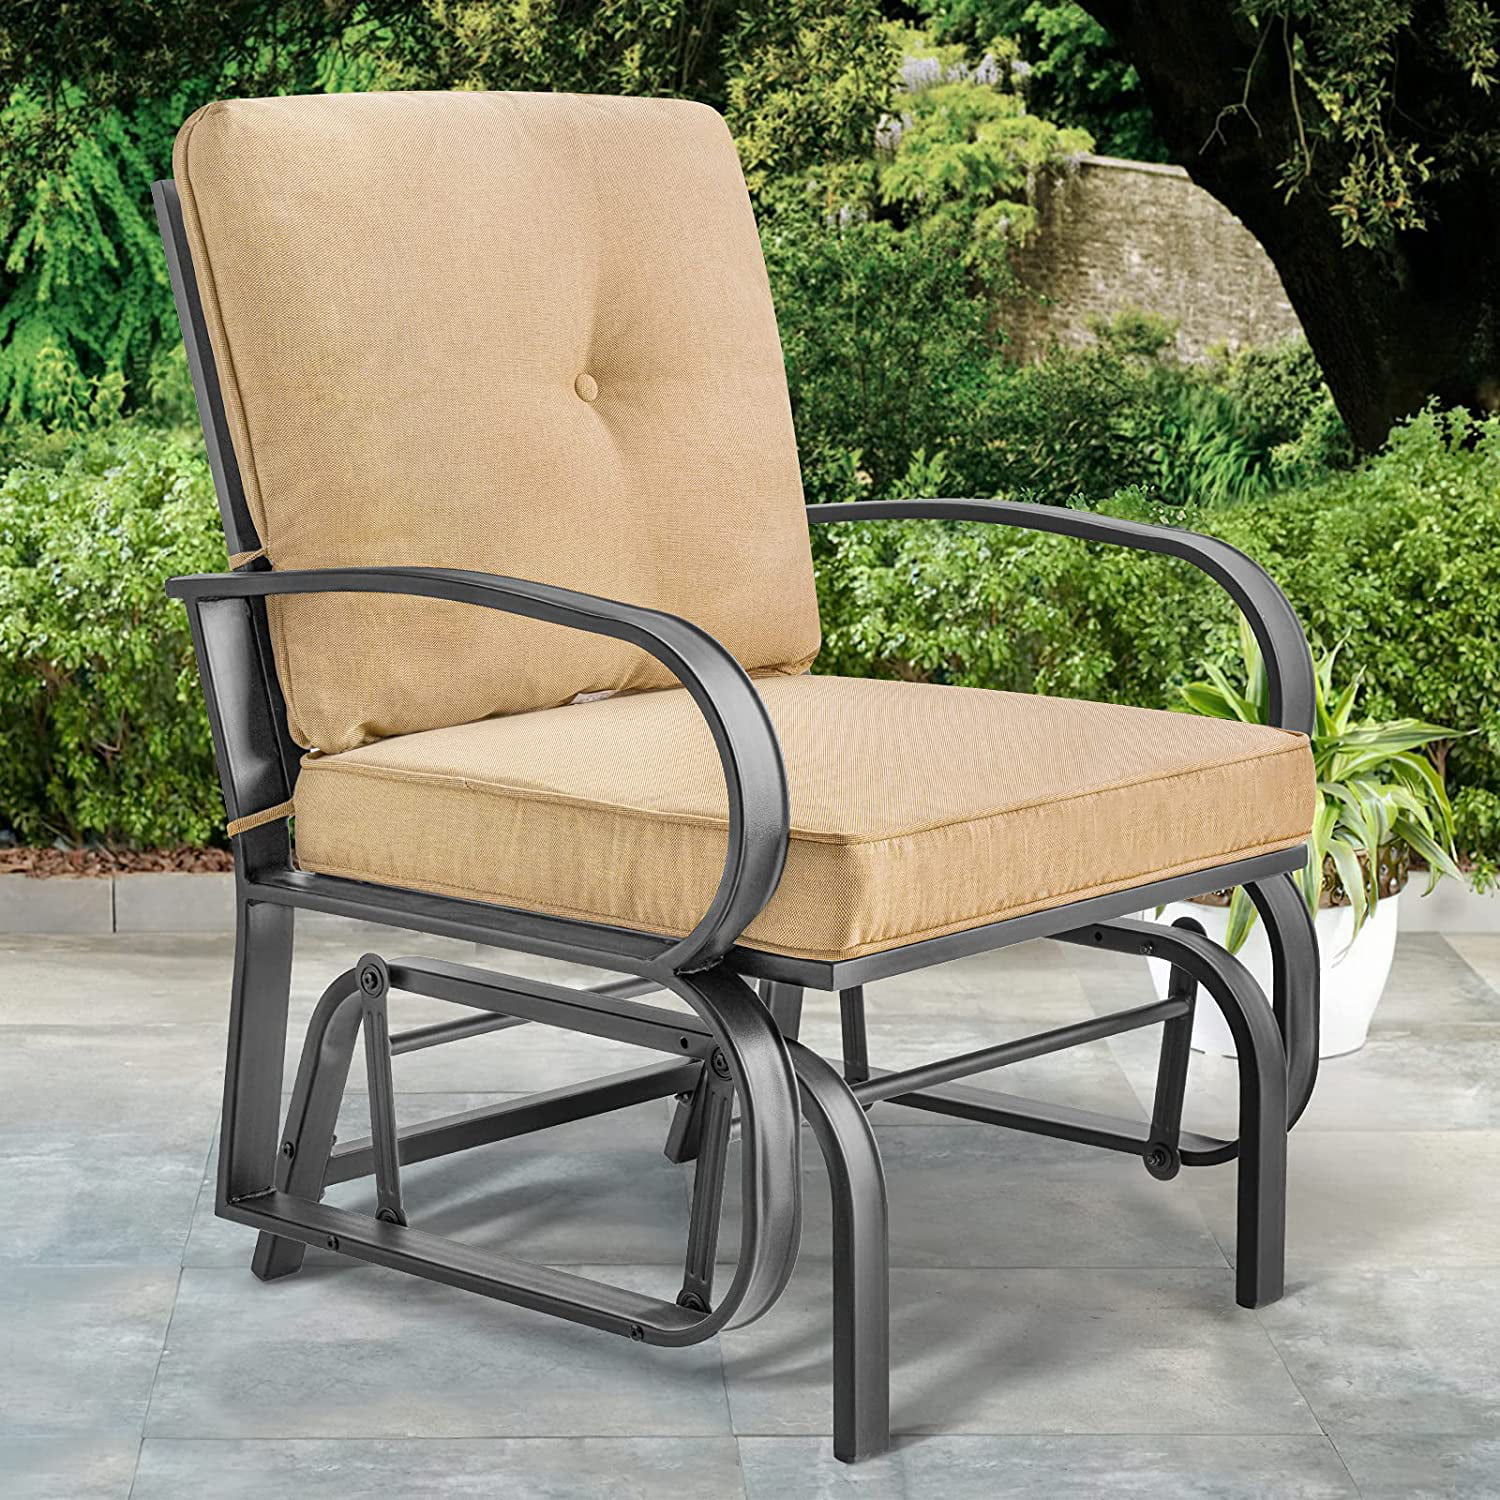 Outdoor Patio Glider Chair with Cushions - Sunmthink Single Garden